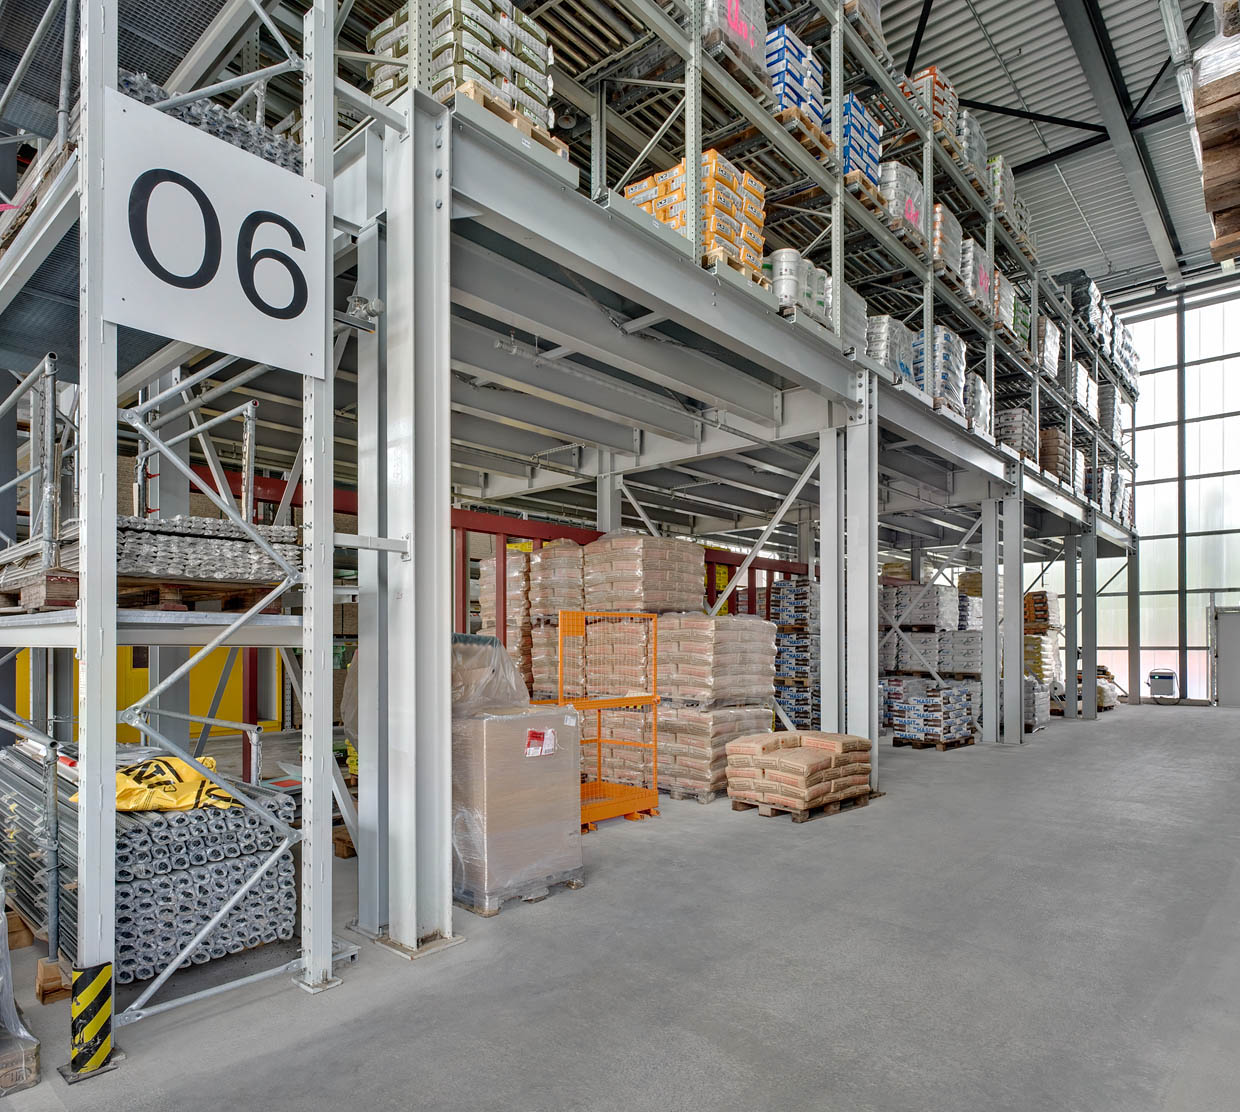 [Translate "Hungary"] Cantilever racking Multi-tier storage